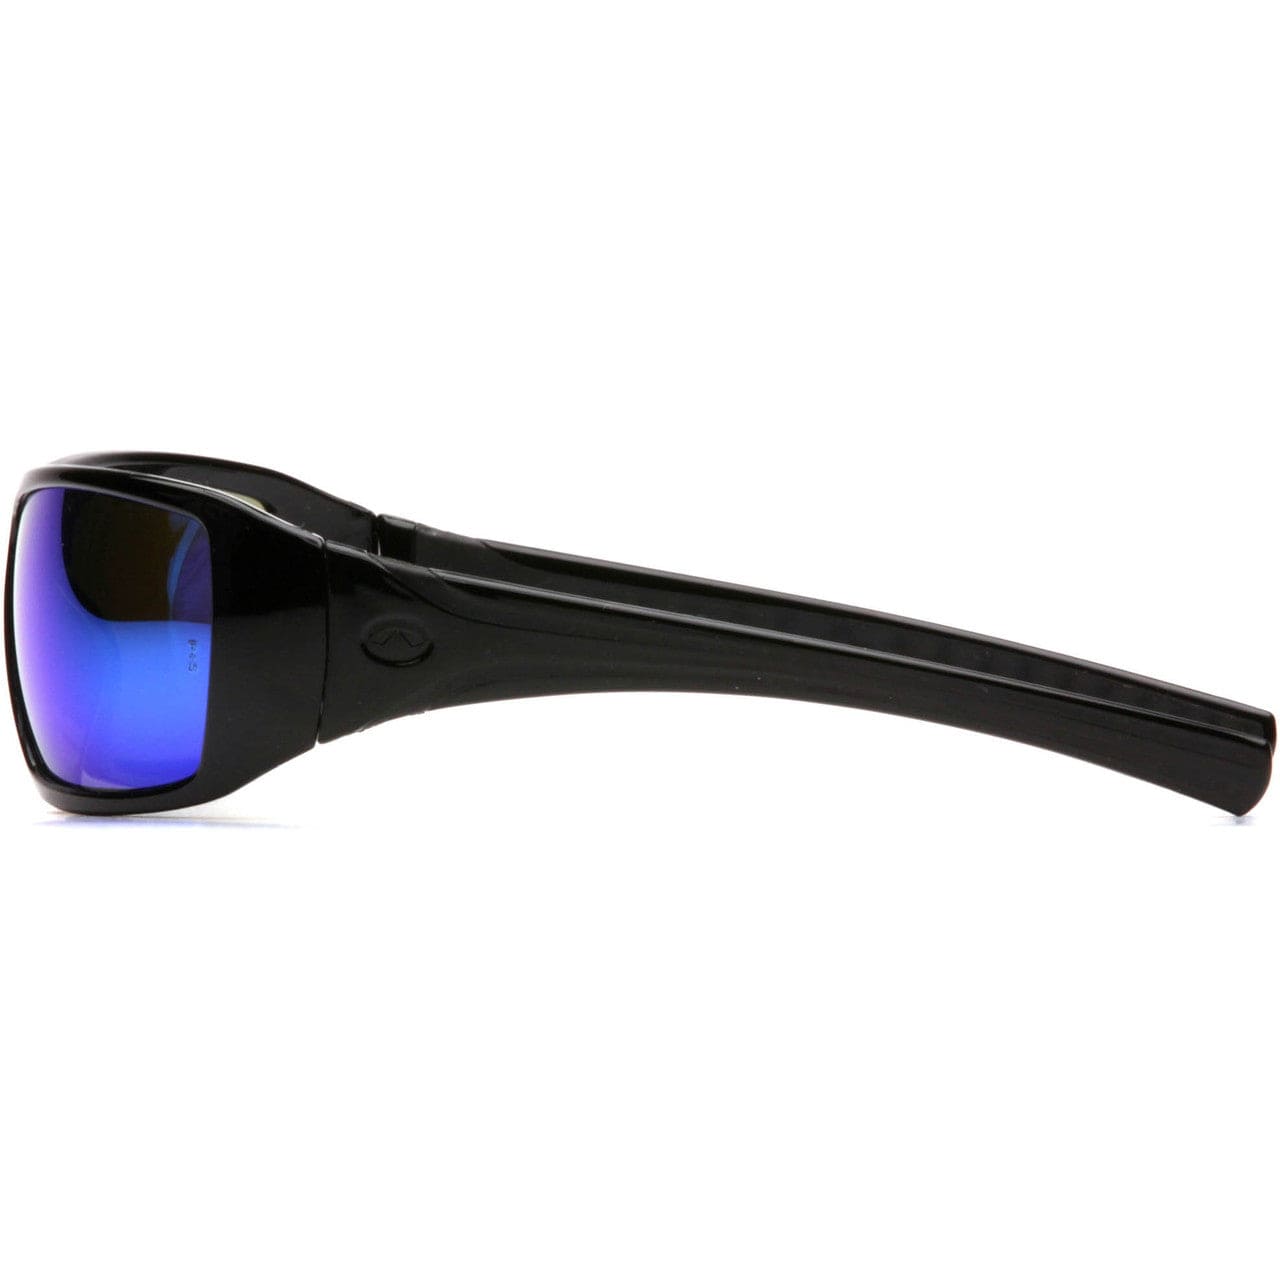 Pyramex Goliath Safety Glasses with Black Frame and Ice Blue Mirror Lens SB5665D Side View